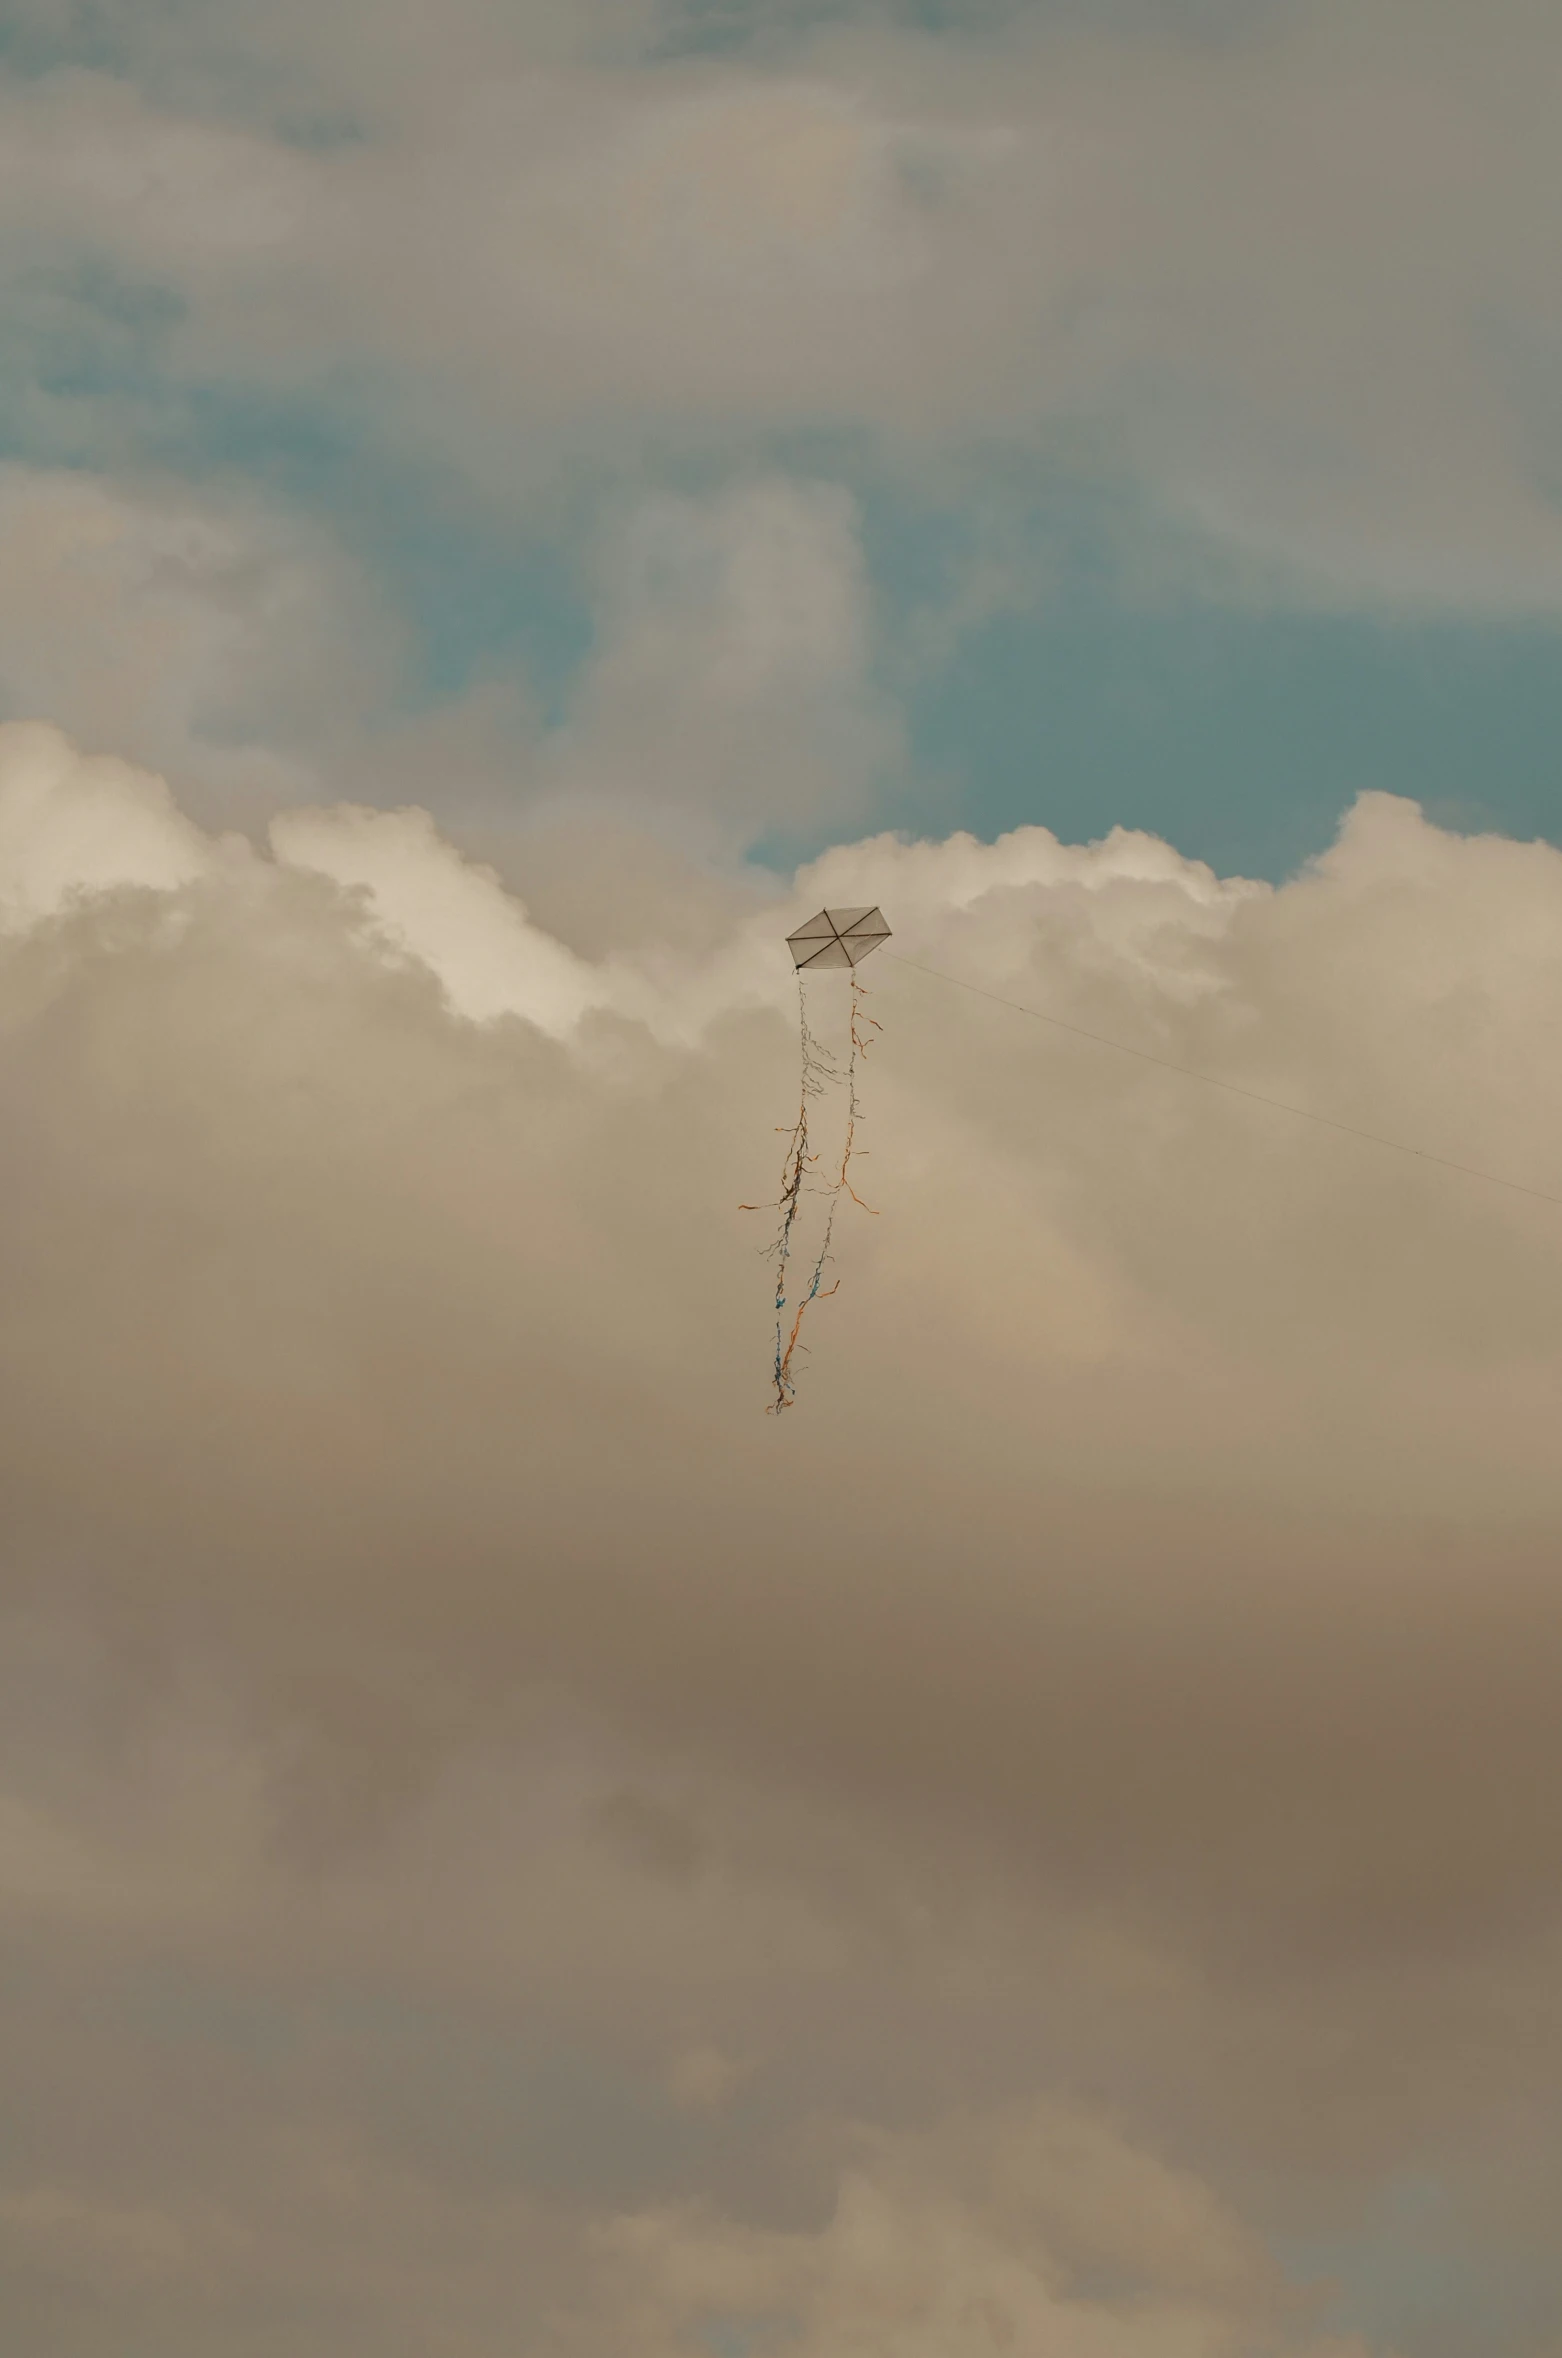 a kite flying on cloudy skies in the daytime